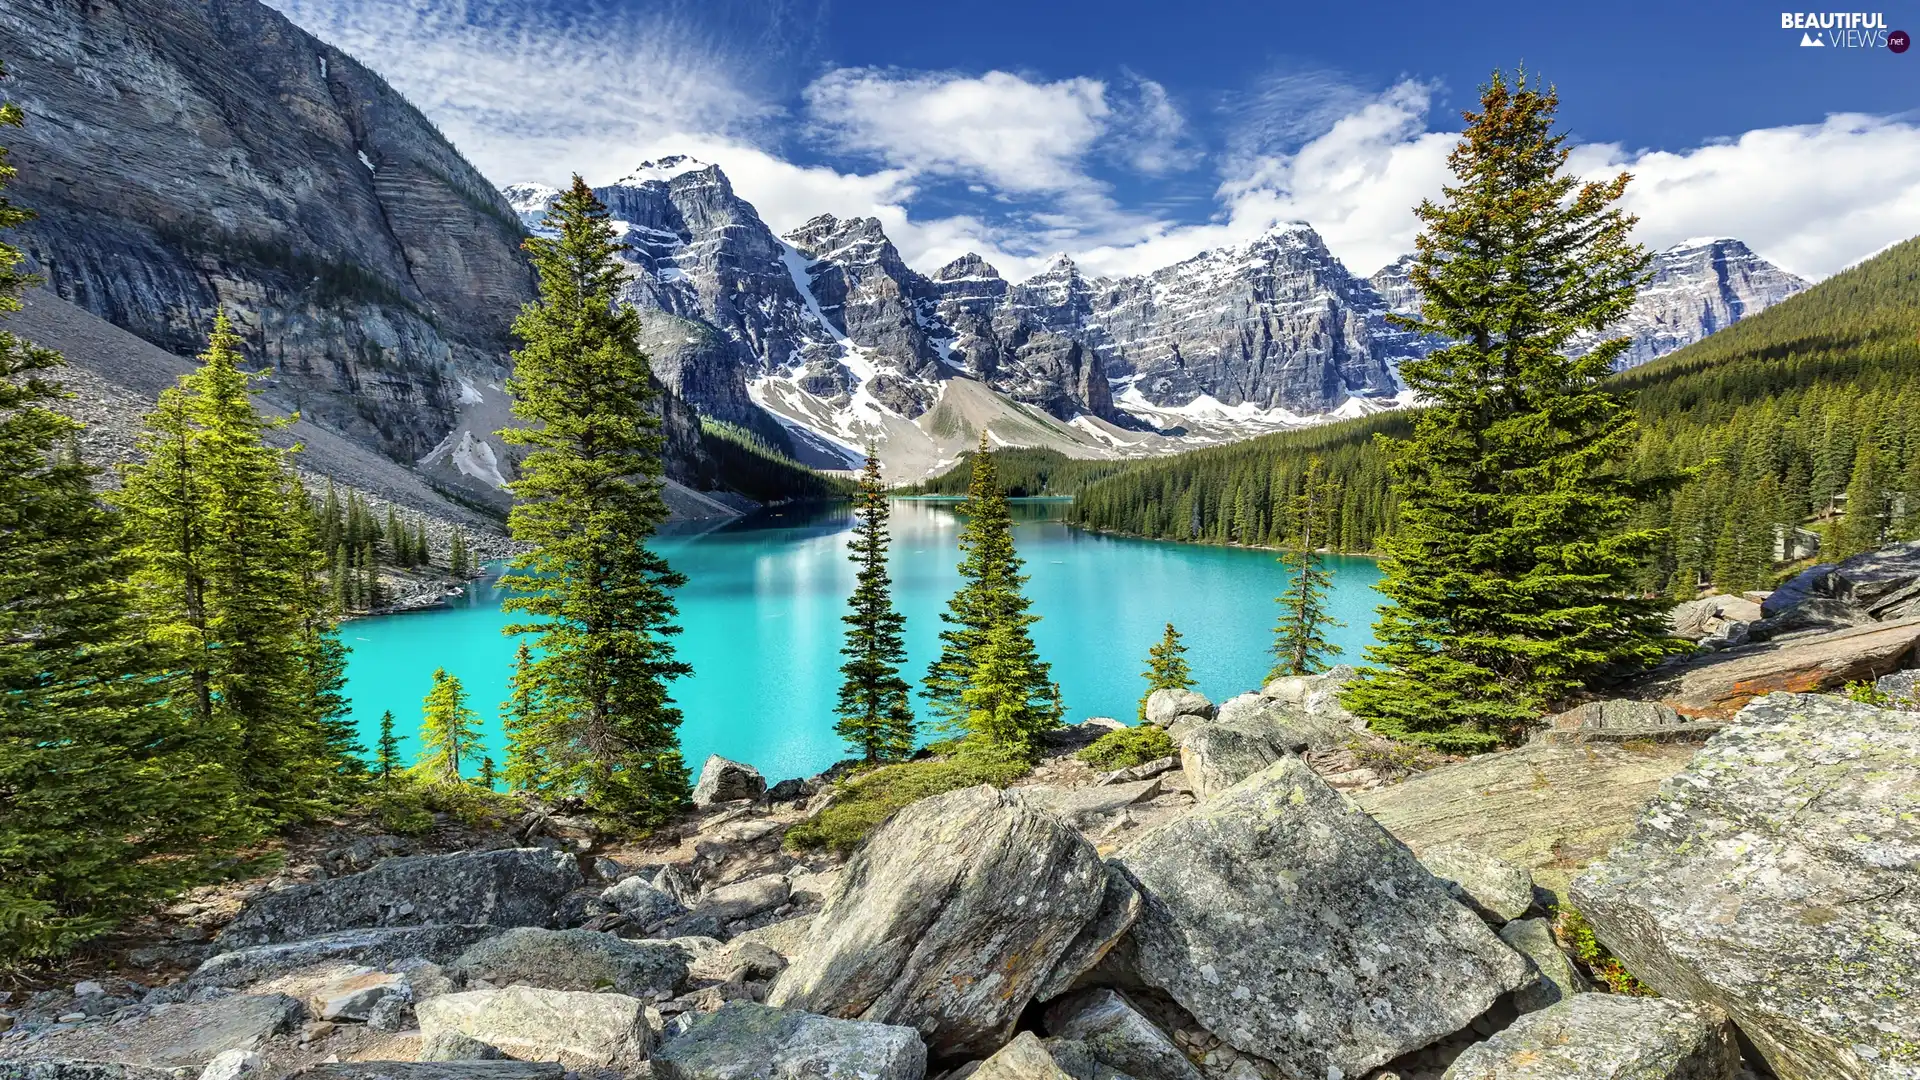 viewes, Alberta, Lake Moraine, clouds, forest, Canada, Banff National Park, Mountains, Stones, trees